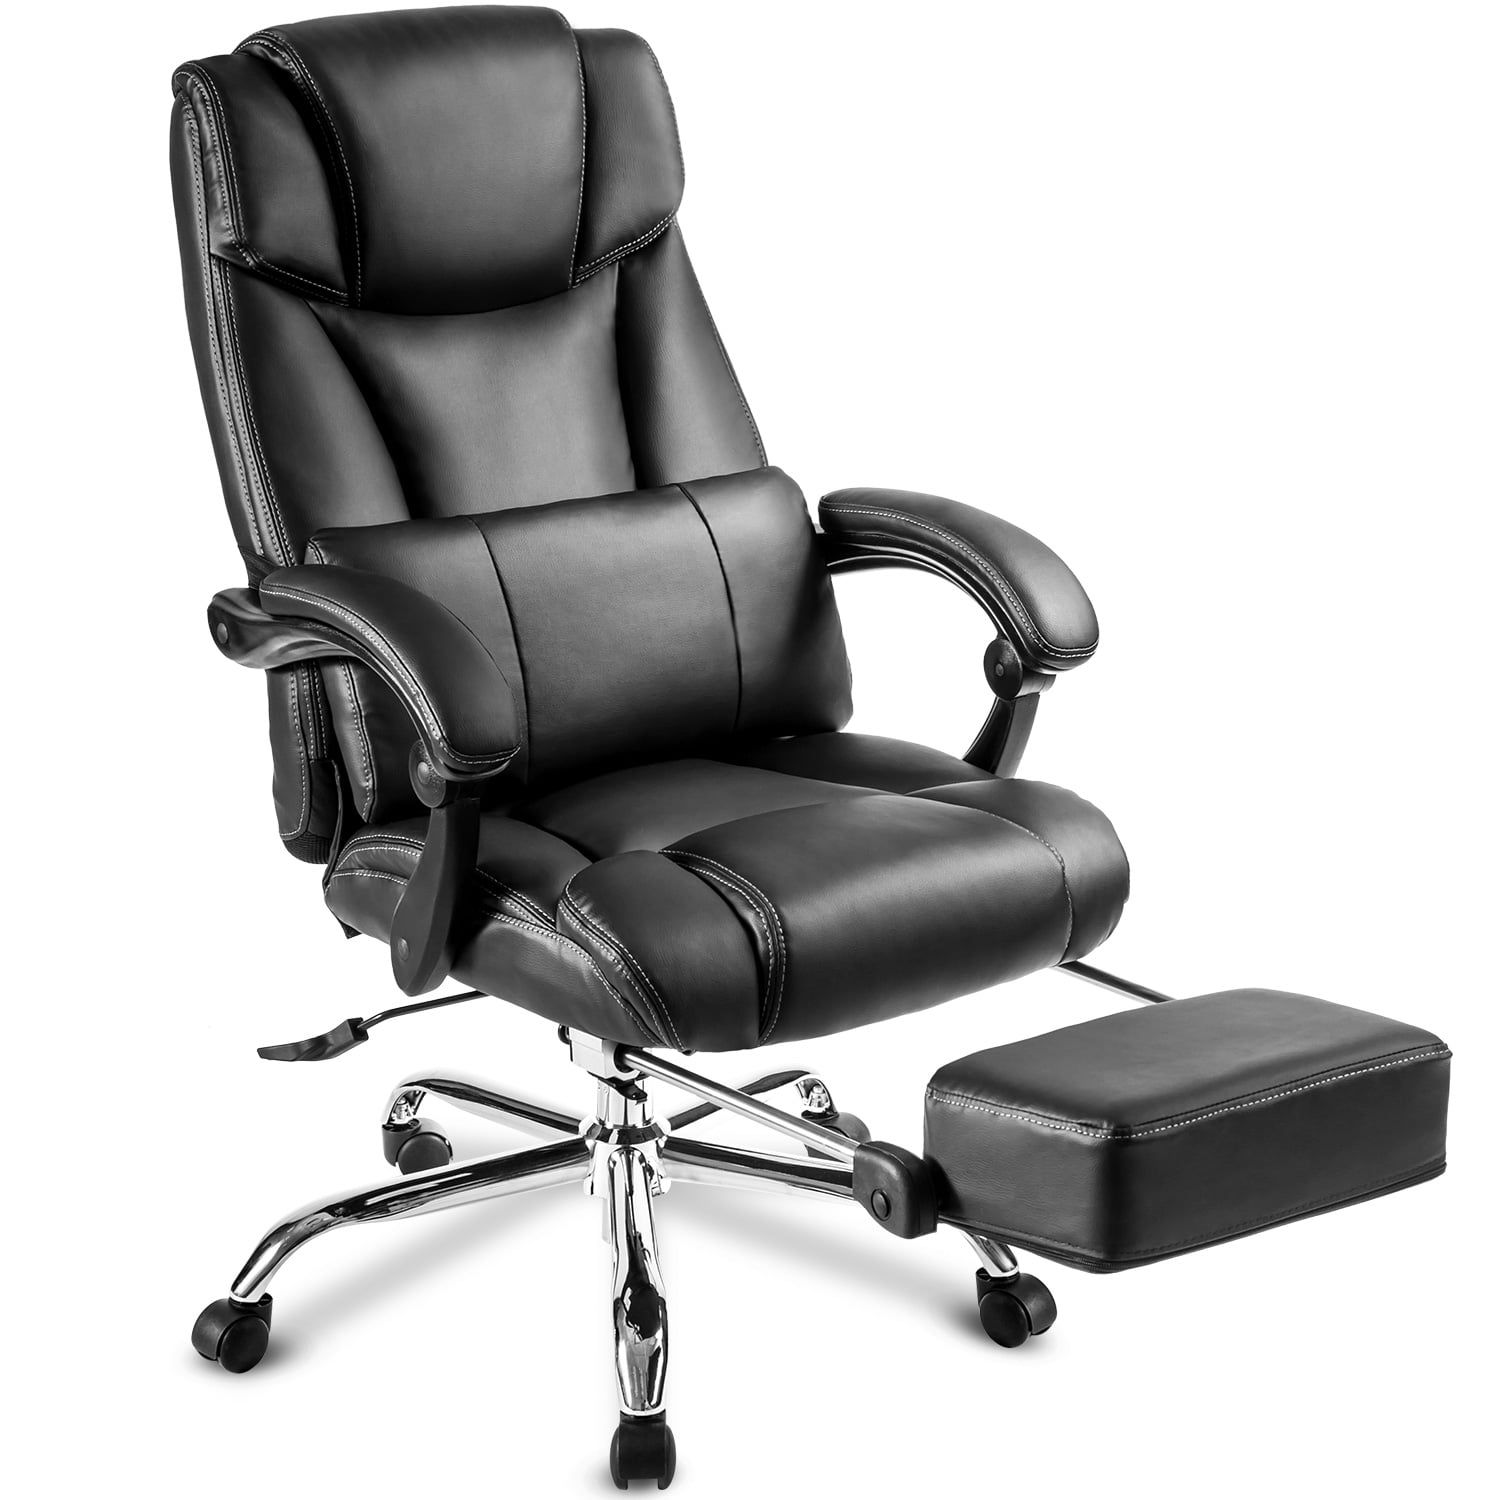 Task Office Chair, 90-170 Degree Adjustable Reclining Executive Office